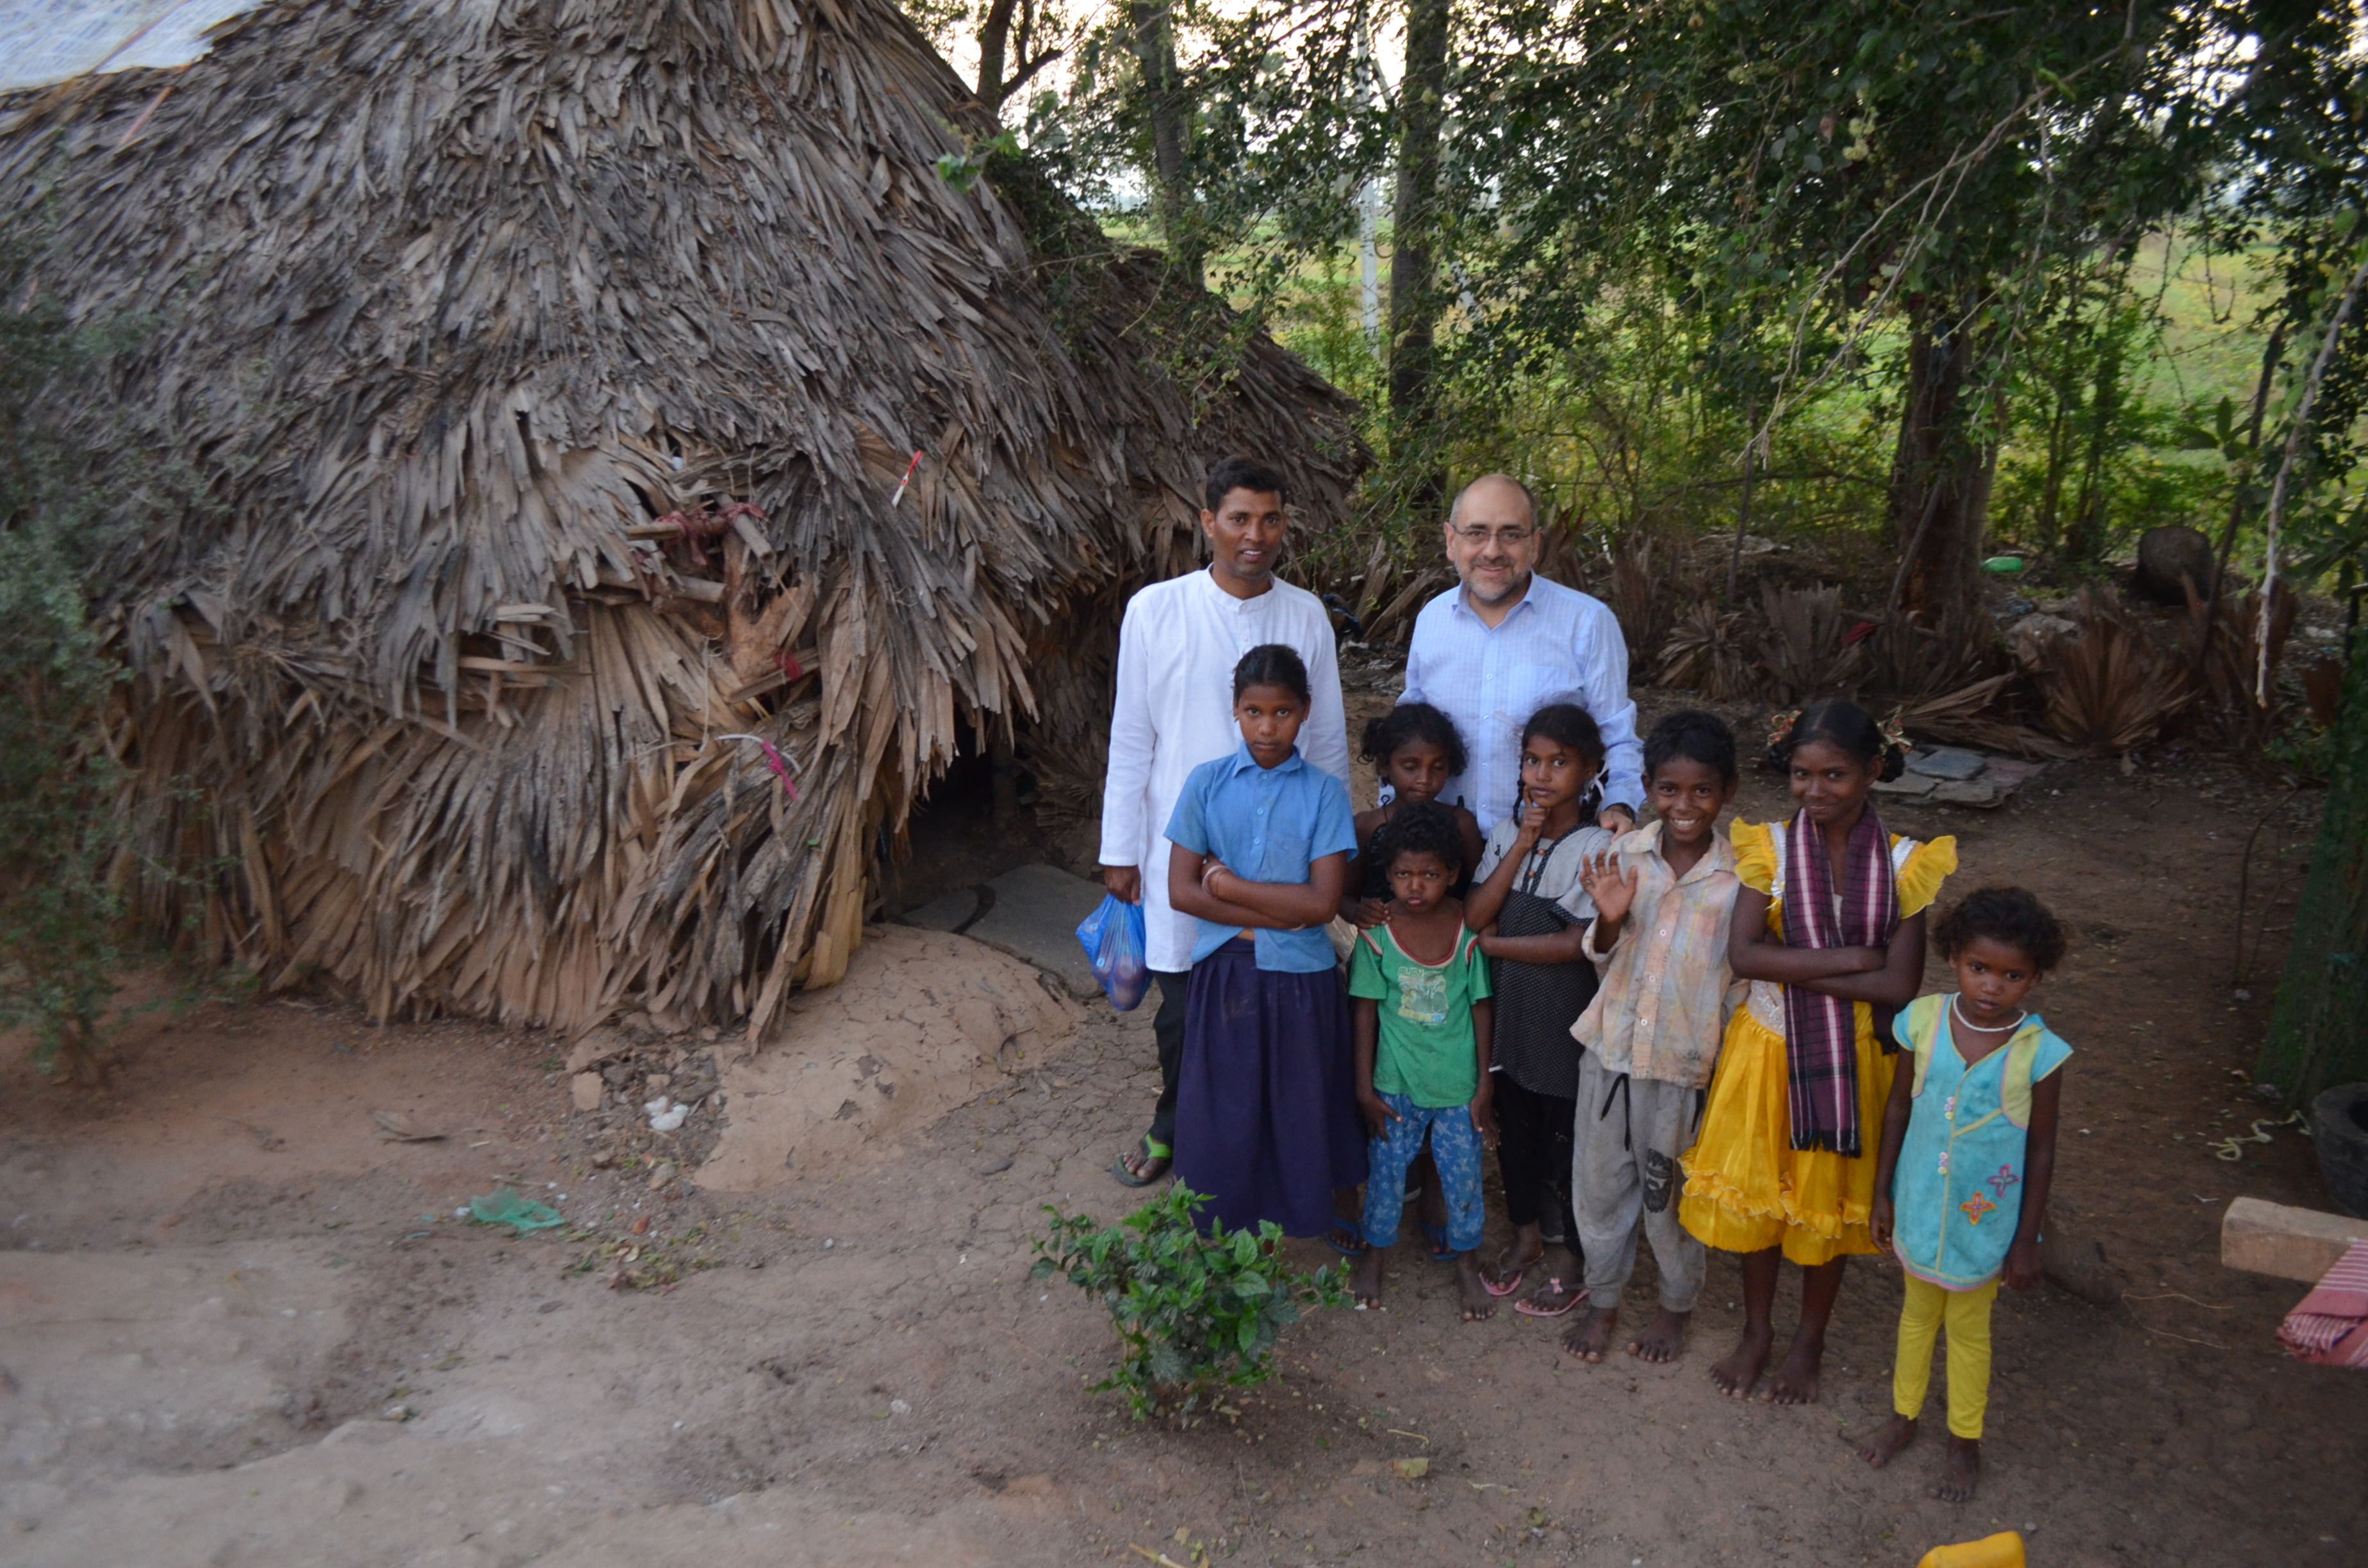 Sharing God’s Love With “Untouchable” Villages and Communities